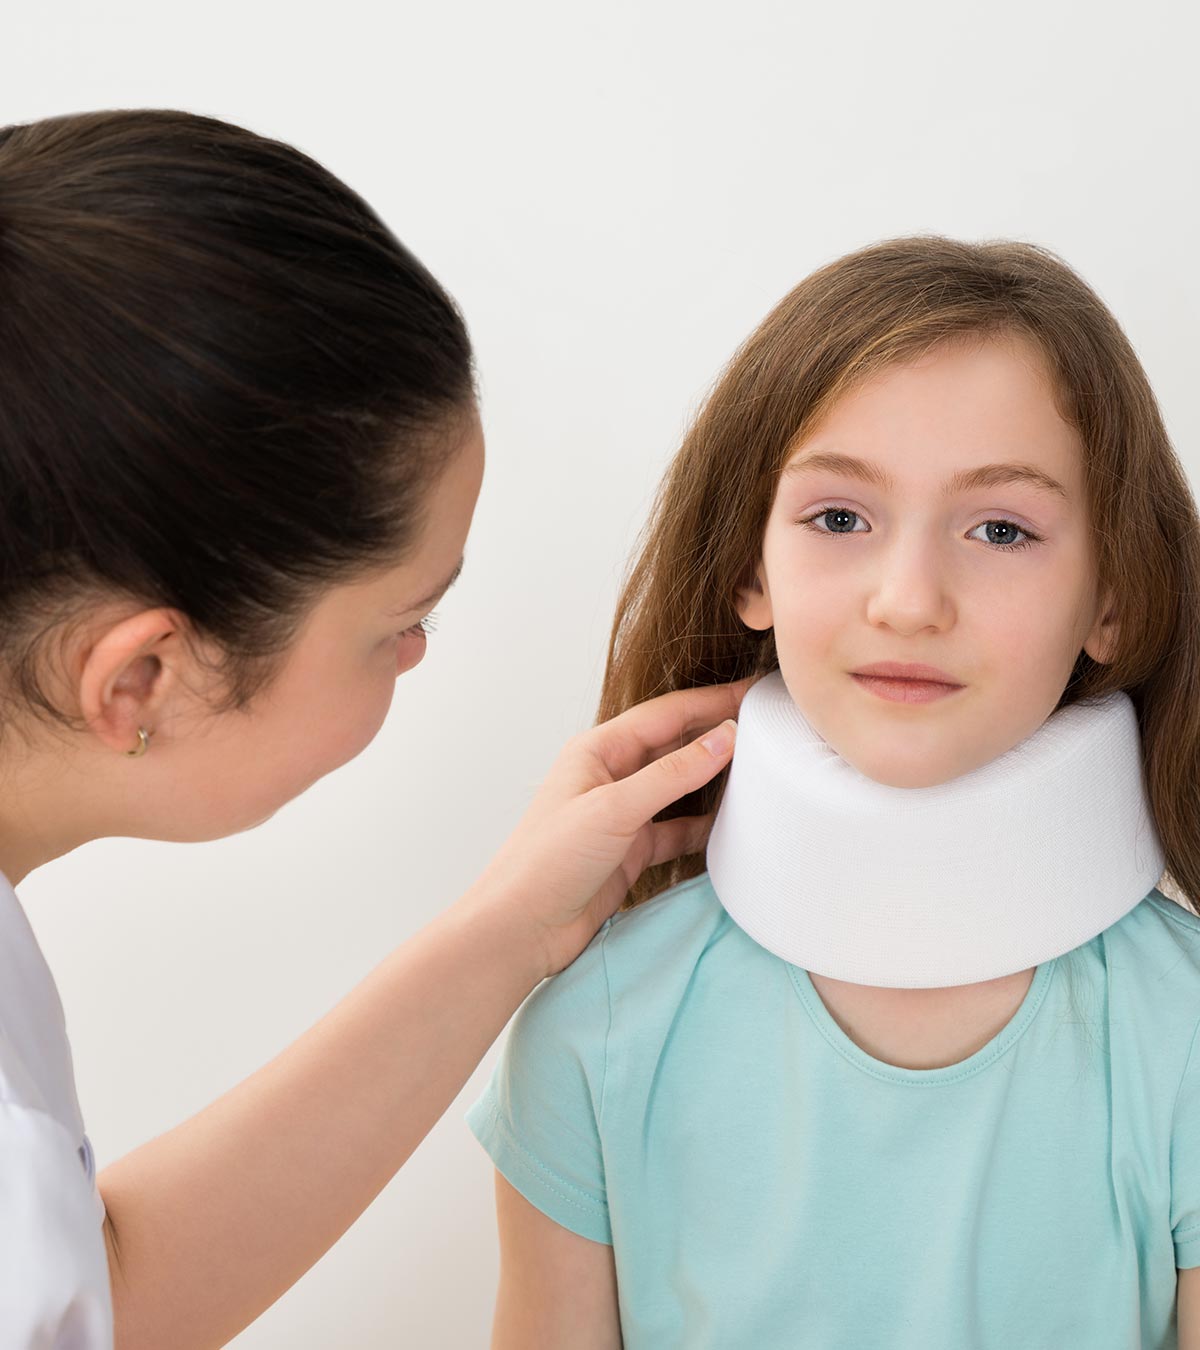 Torticollis In Children: Causes, Symptoms And Treatment